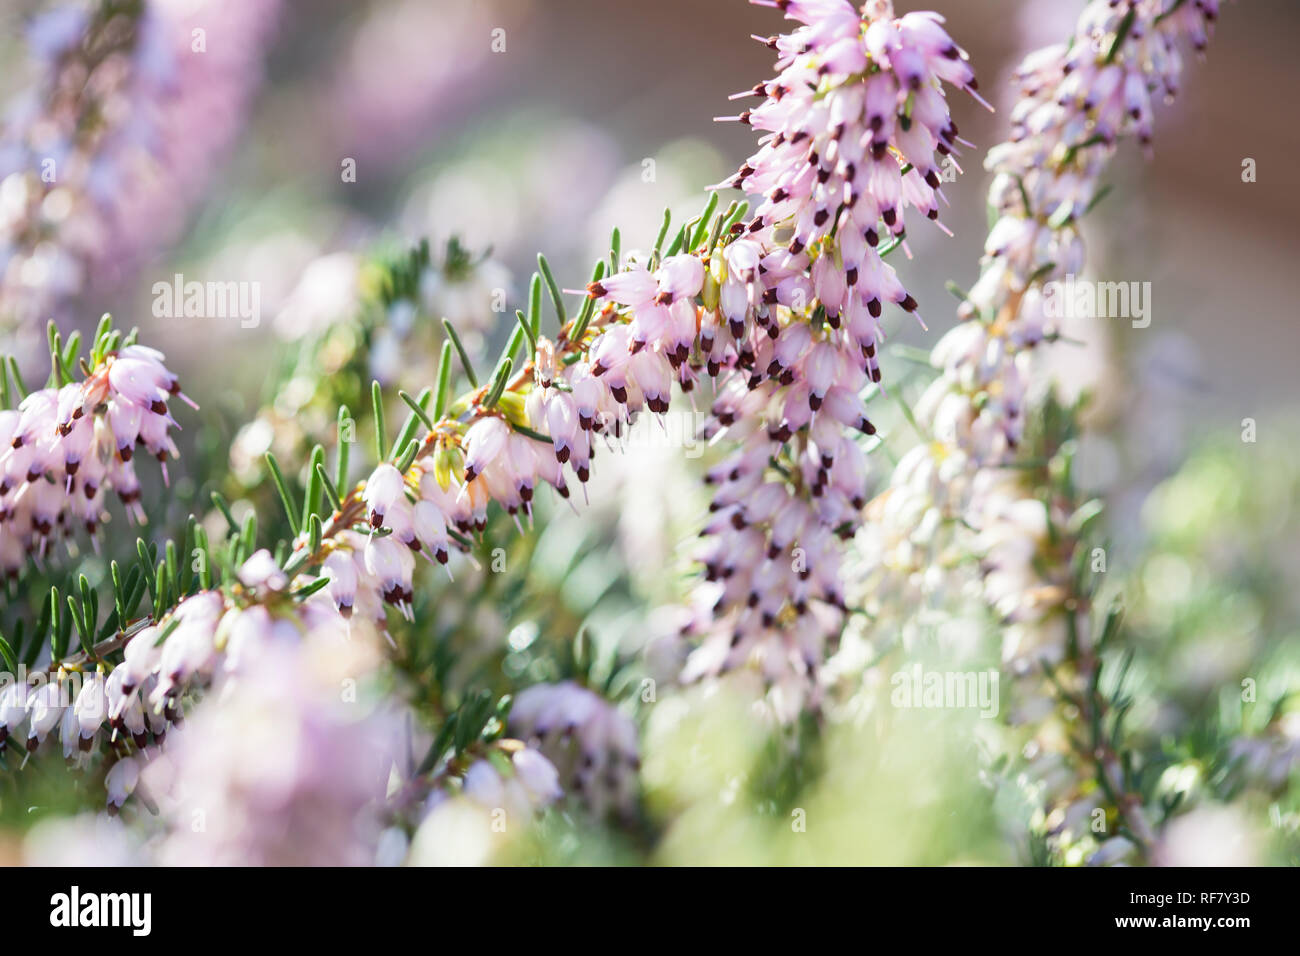 Delicate rose-pink flowers of Erica darleyensis plant (Winter Heath) in winter garden during sunny day Stock Photo